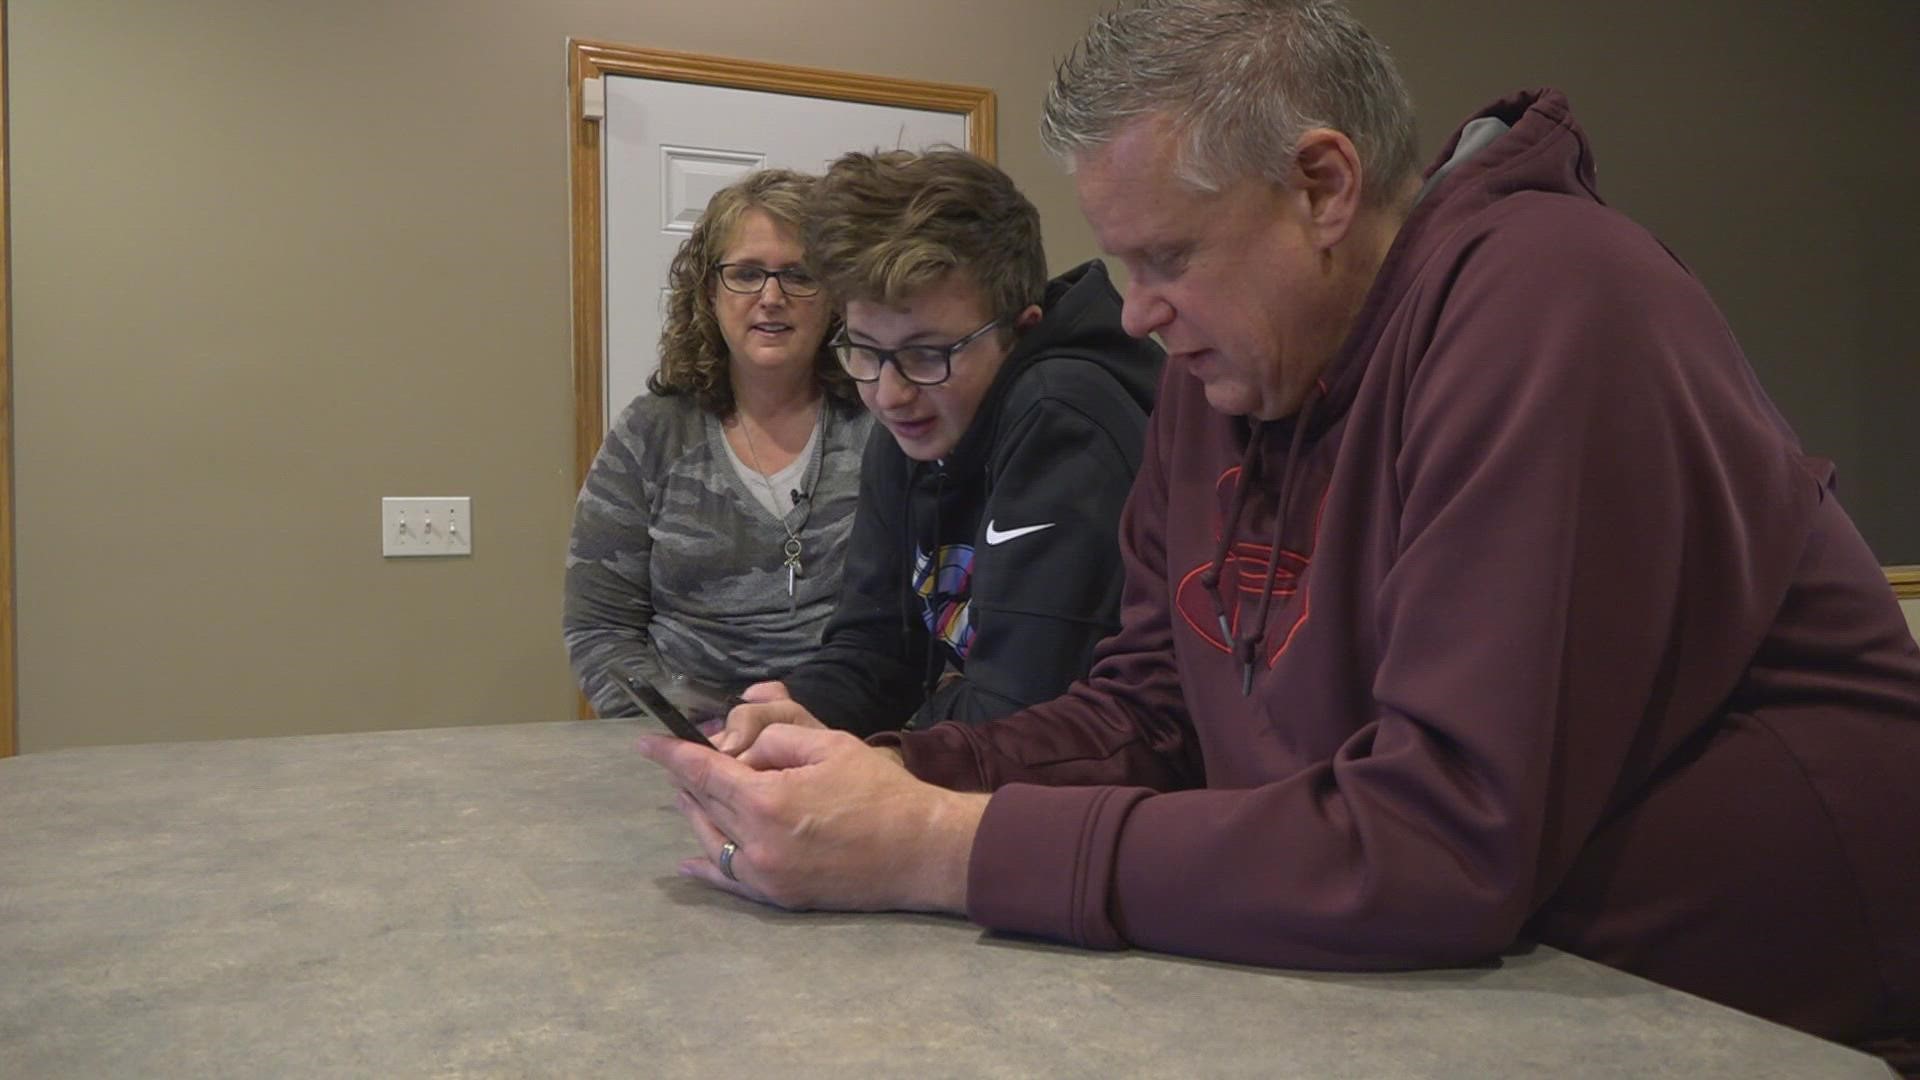 15-year-old Pierce Overway was officially adopted into his family Thursday after 2,642 days in the foster care system.